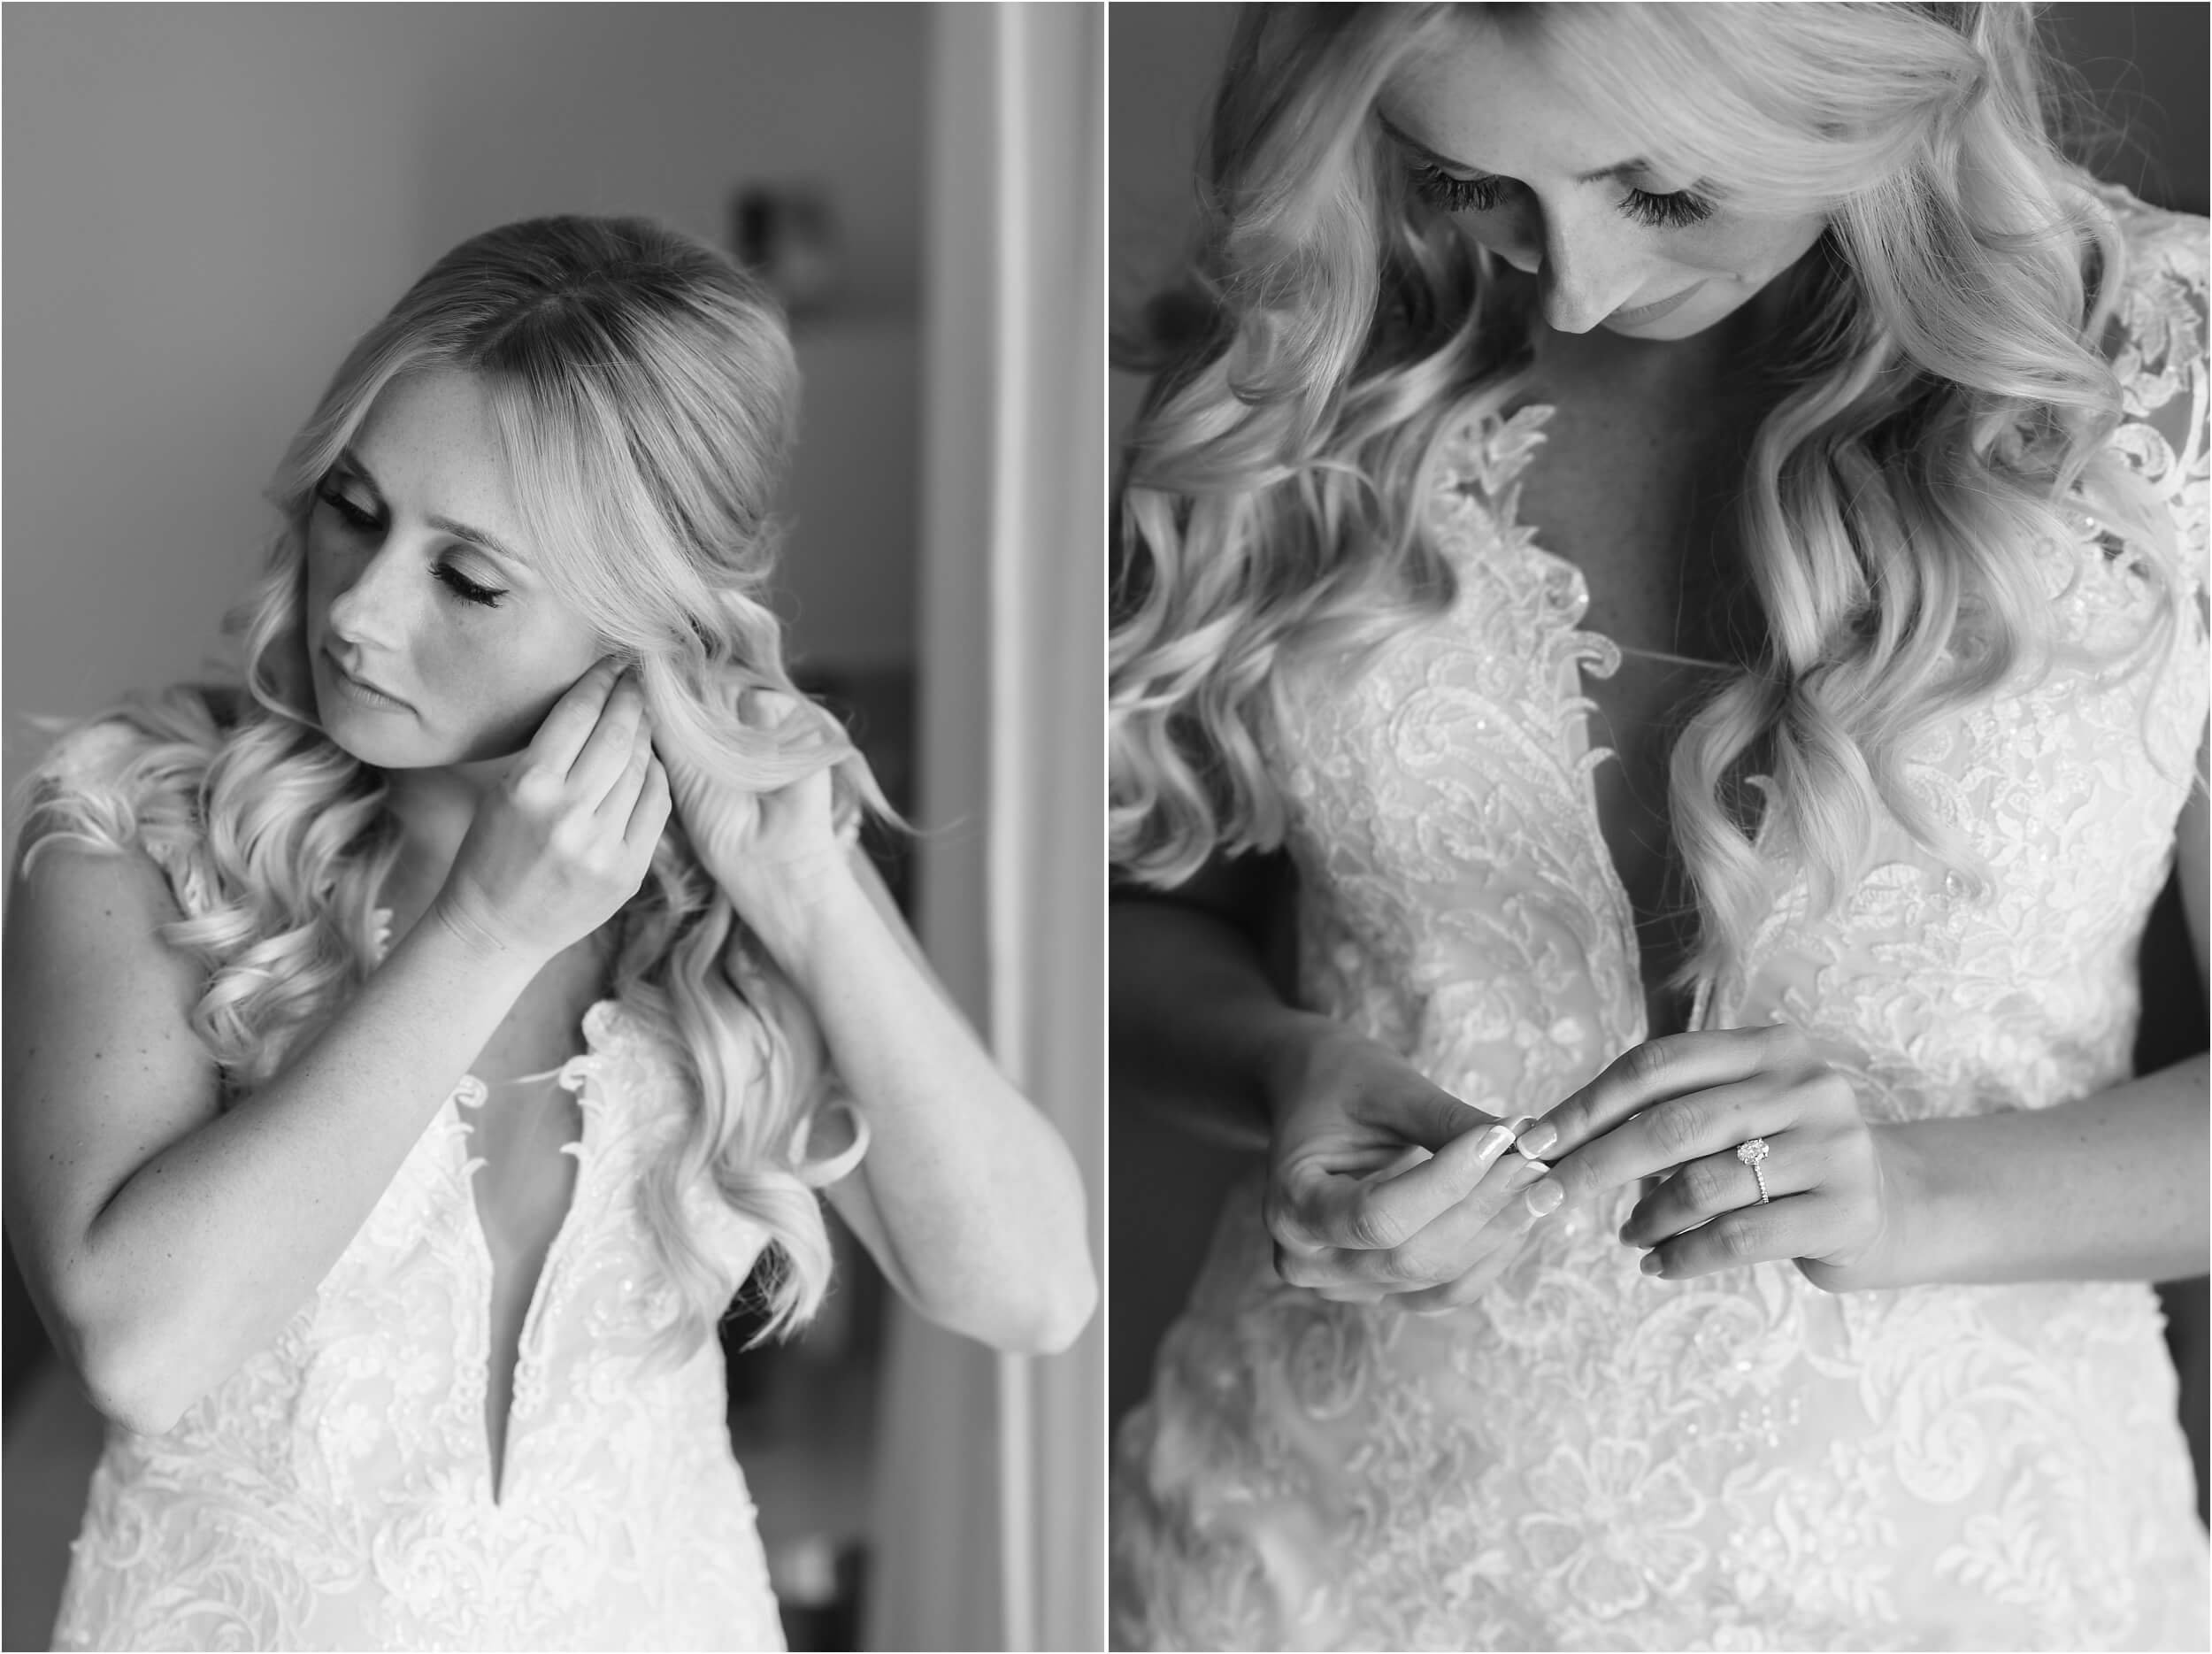  A blonde bride puts her jewelry on.  